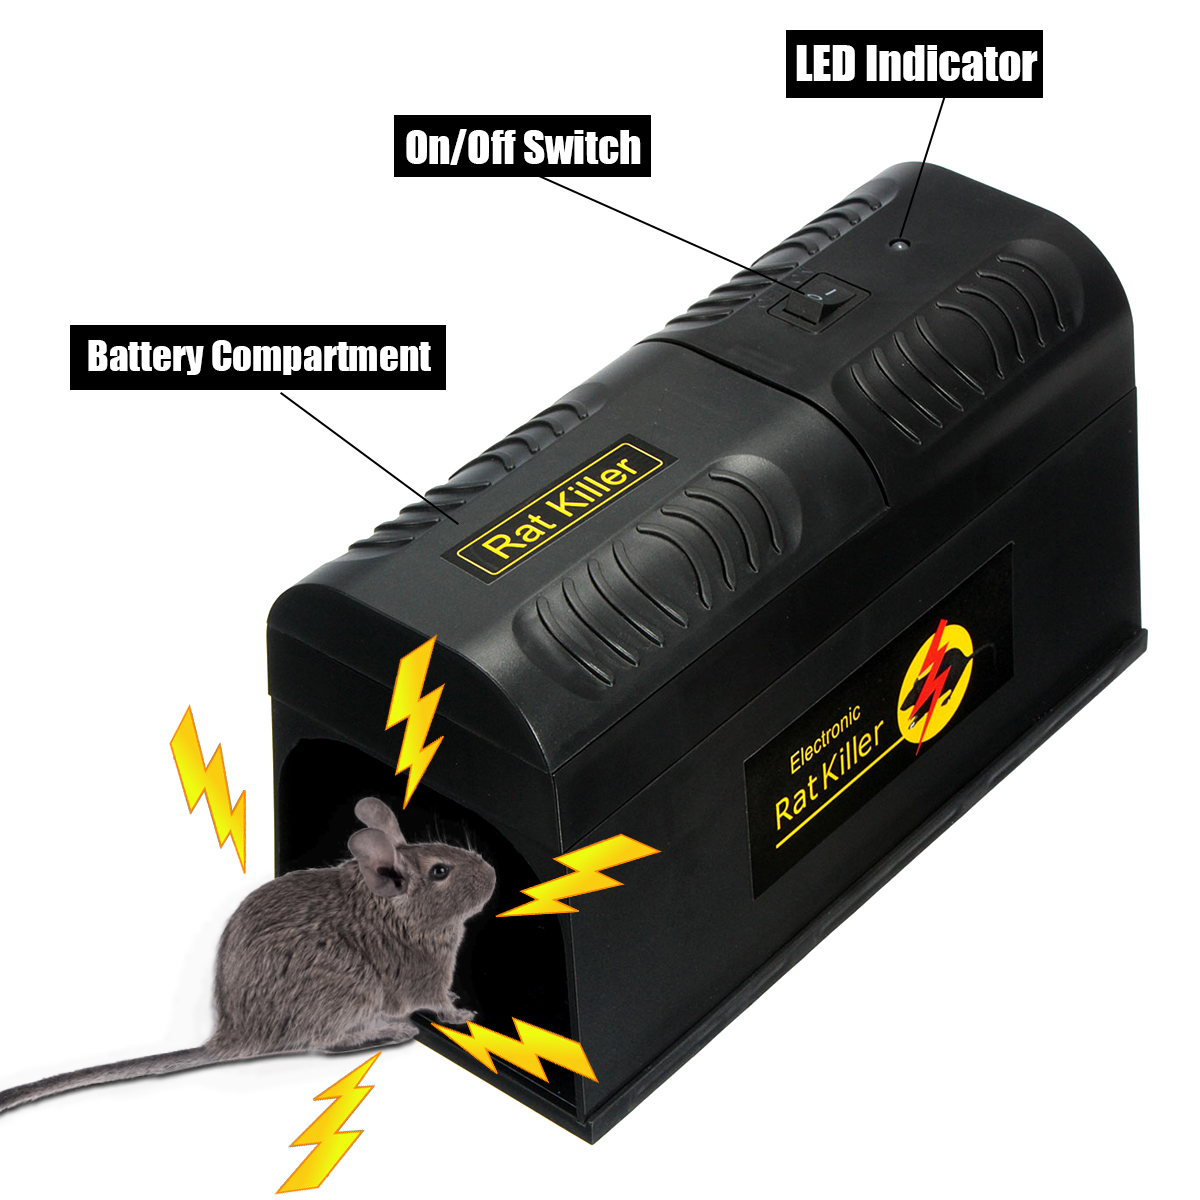 Electronic Mouse Trap Victor Control Rat Killer Pest Electric Rodent Zapper US